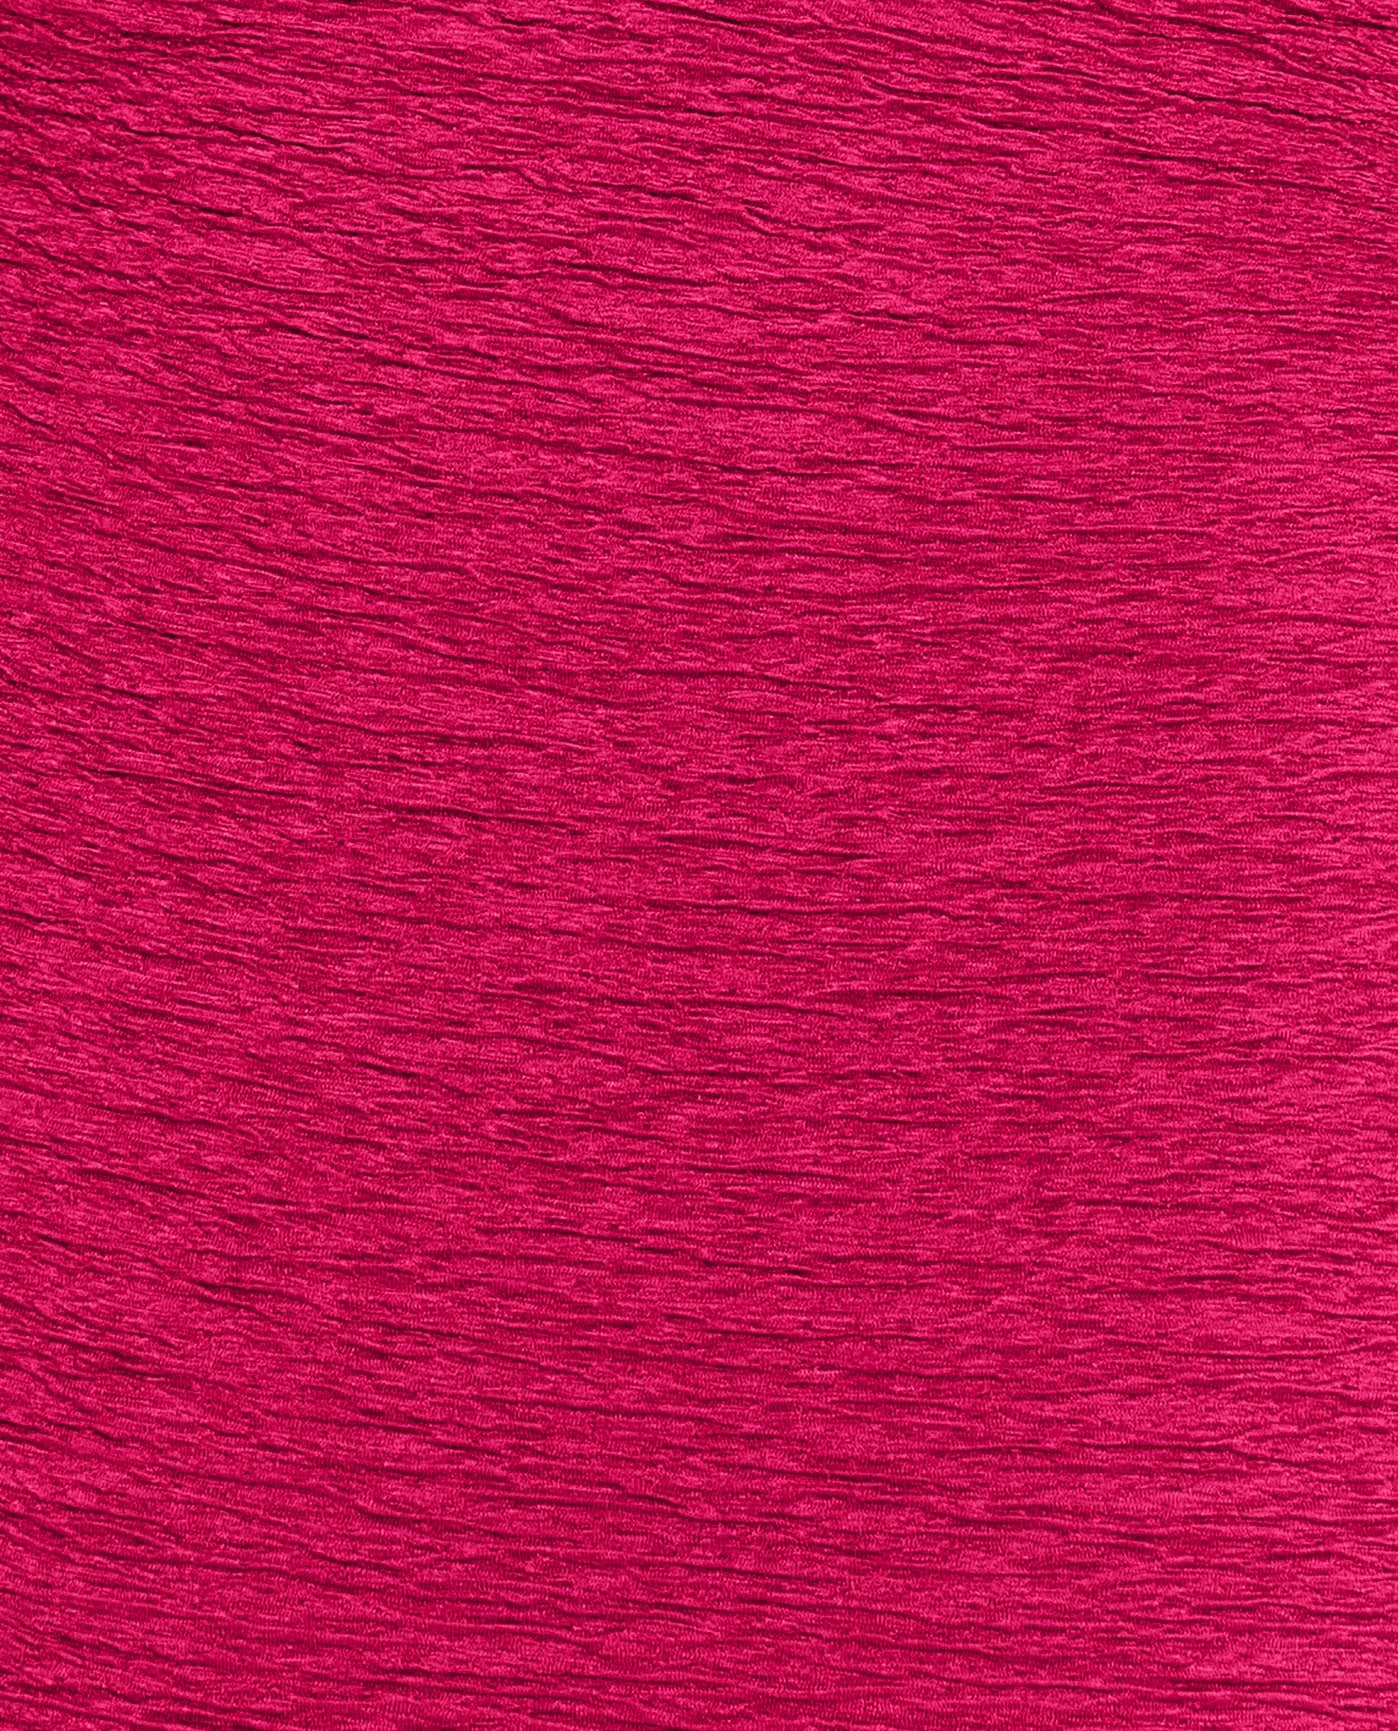 FABRIC SWATCH VIEW OF CHLORINE RESISTANT KRINKLE TEXTURED SOLID EMPIRE MIO LONG TORSO ONE PIECE | KRINKLE BERRY